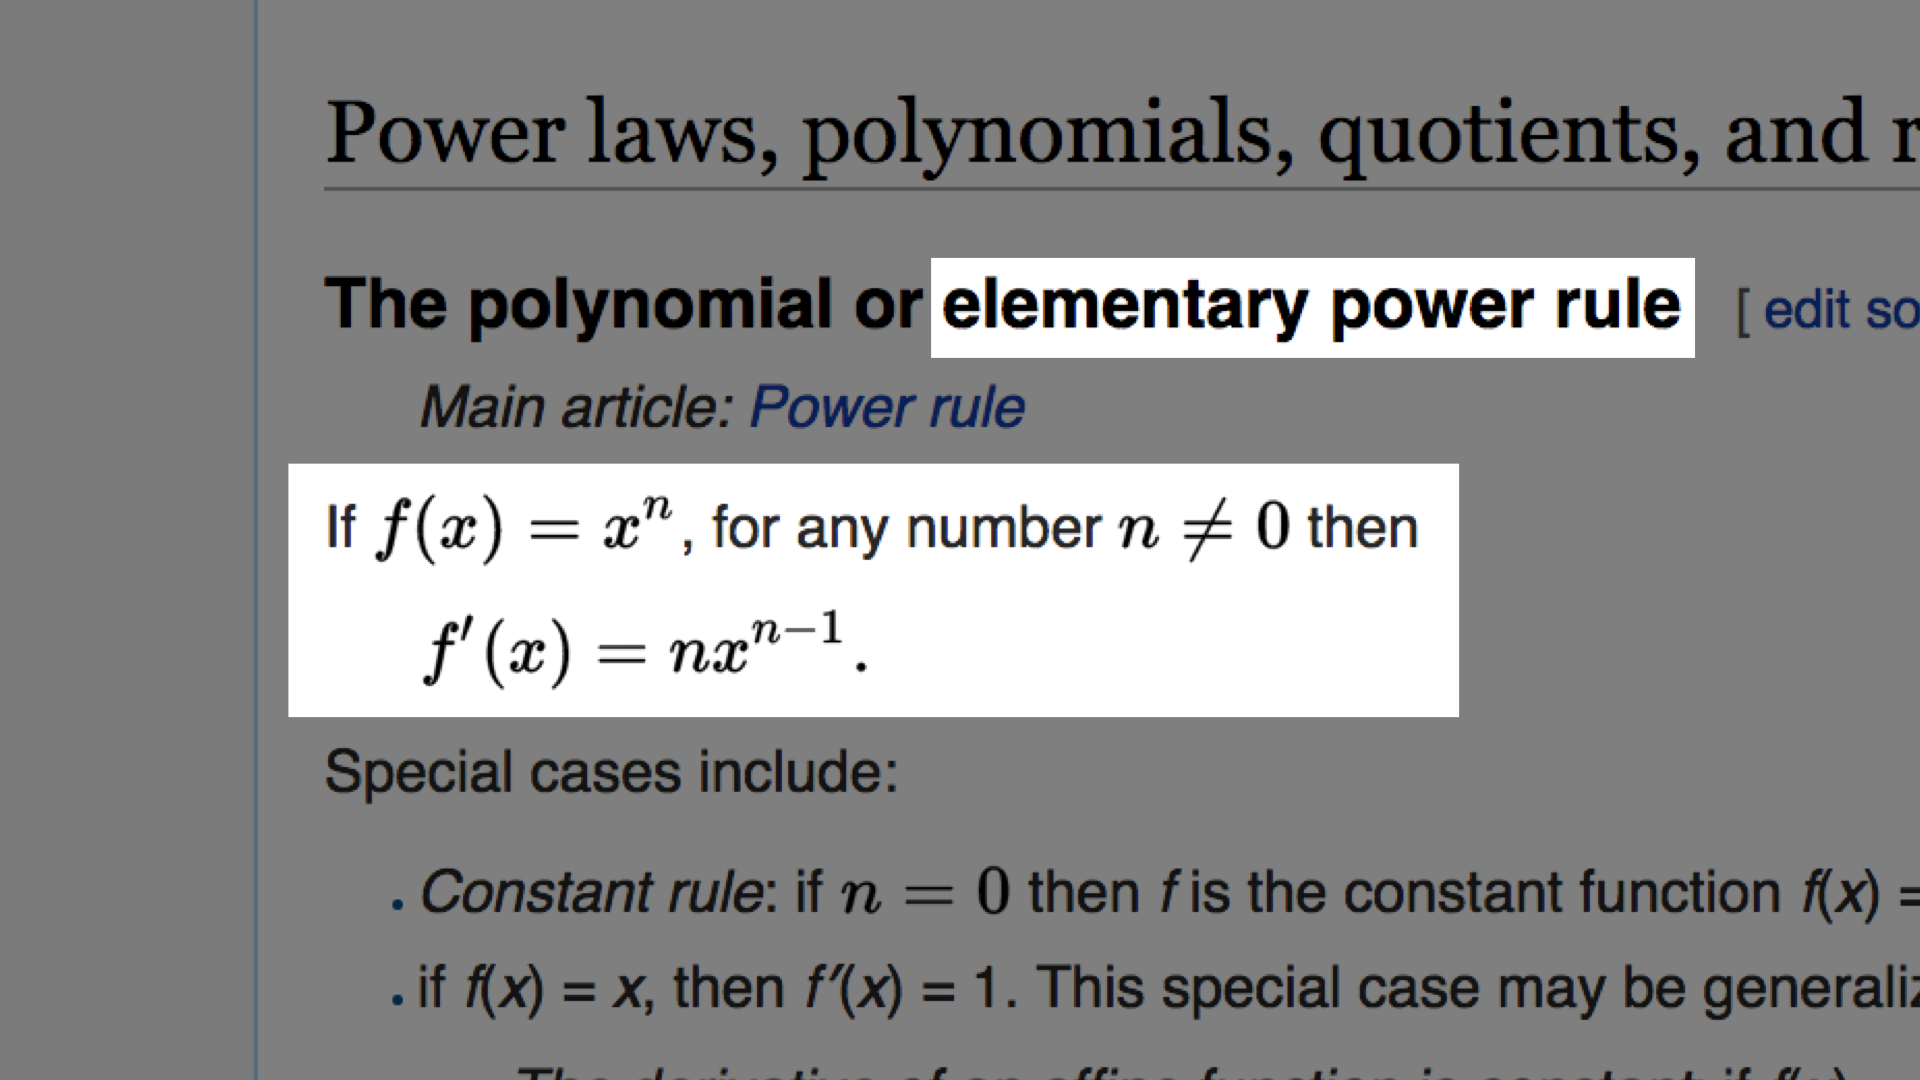 The elementary power rule: If f(x) = x^n, for any number n != 0 then f′(x) = nx^(n-1)